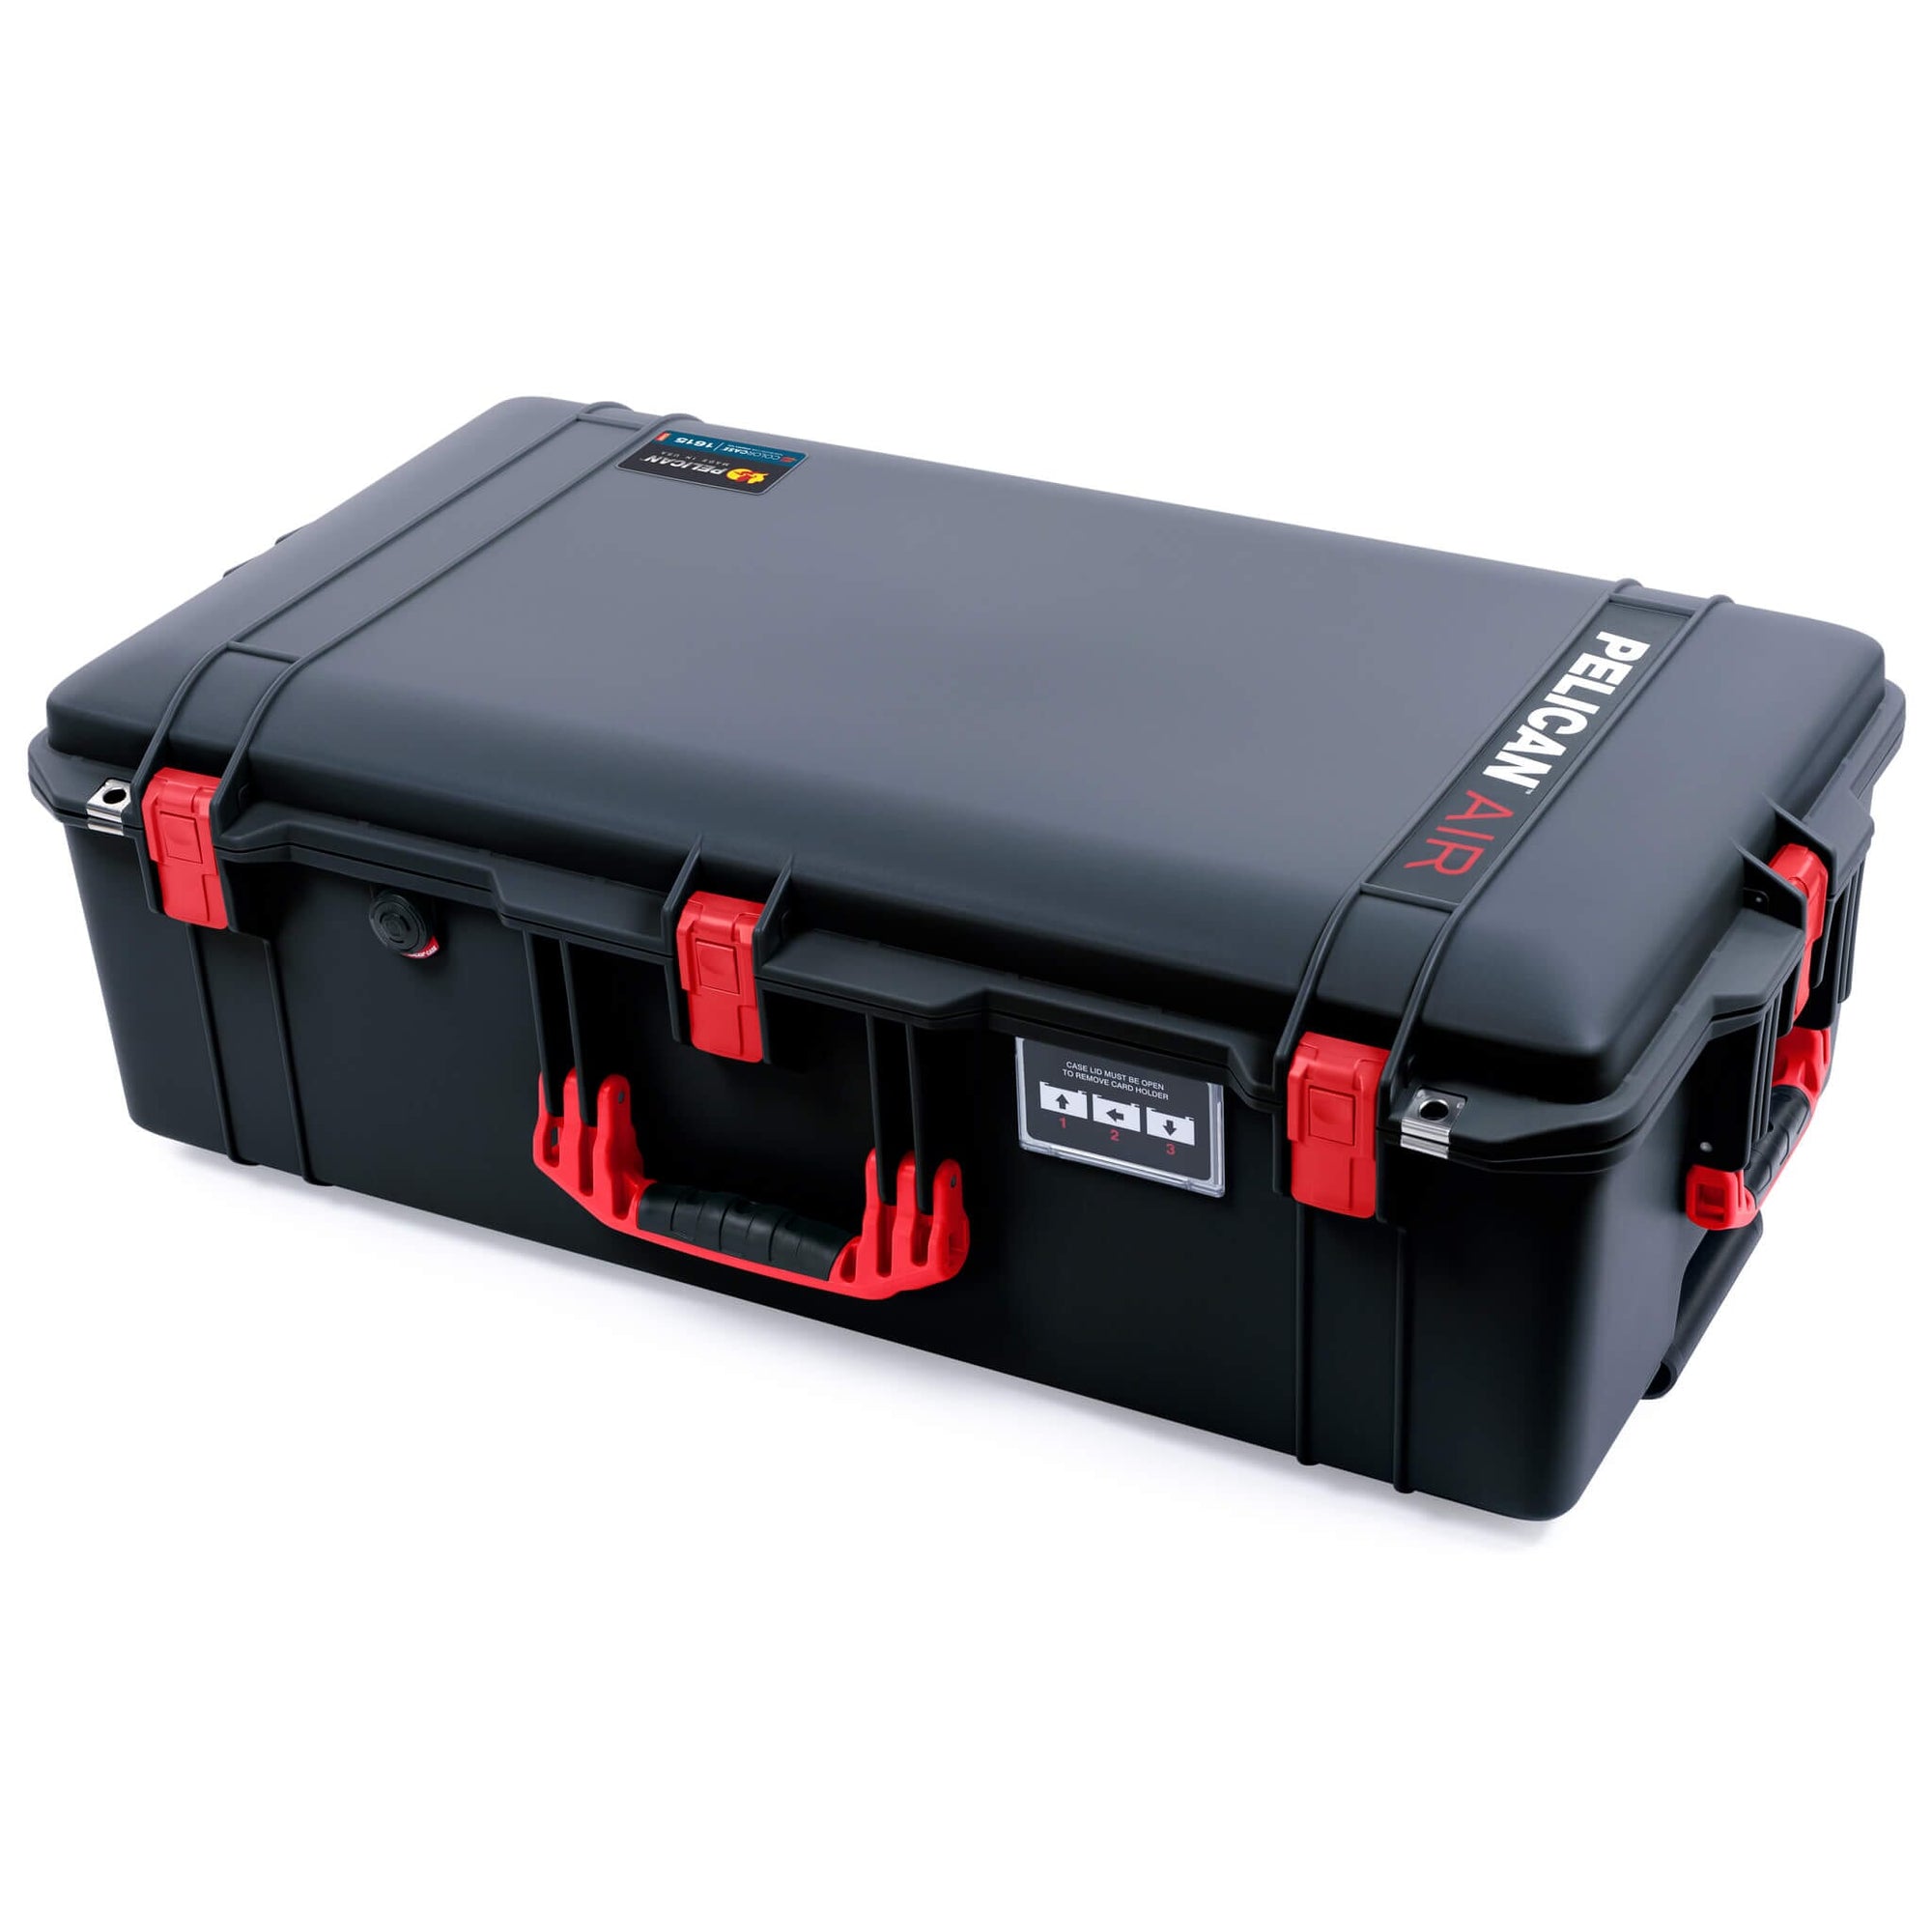 Pelican 1615 Air Case, Black with Red Handles & Latches ColorCase 